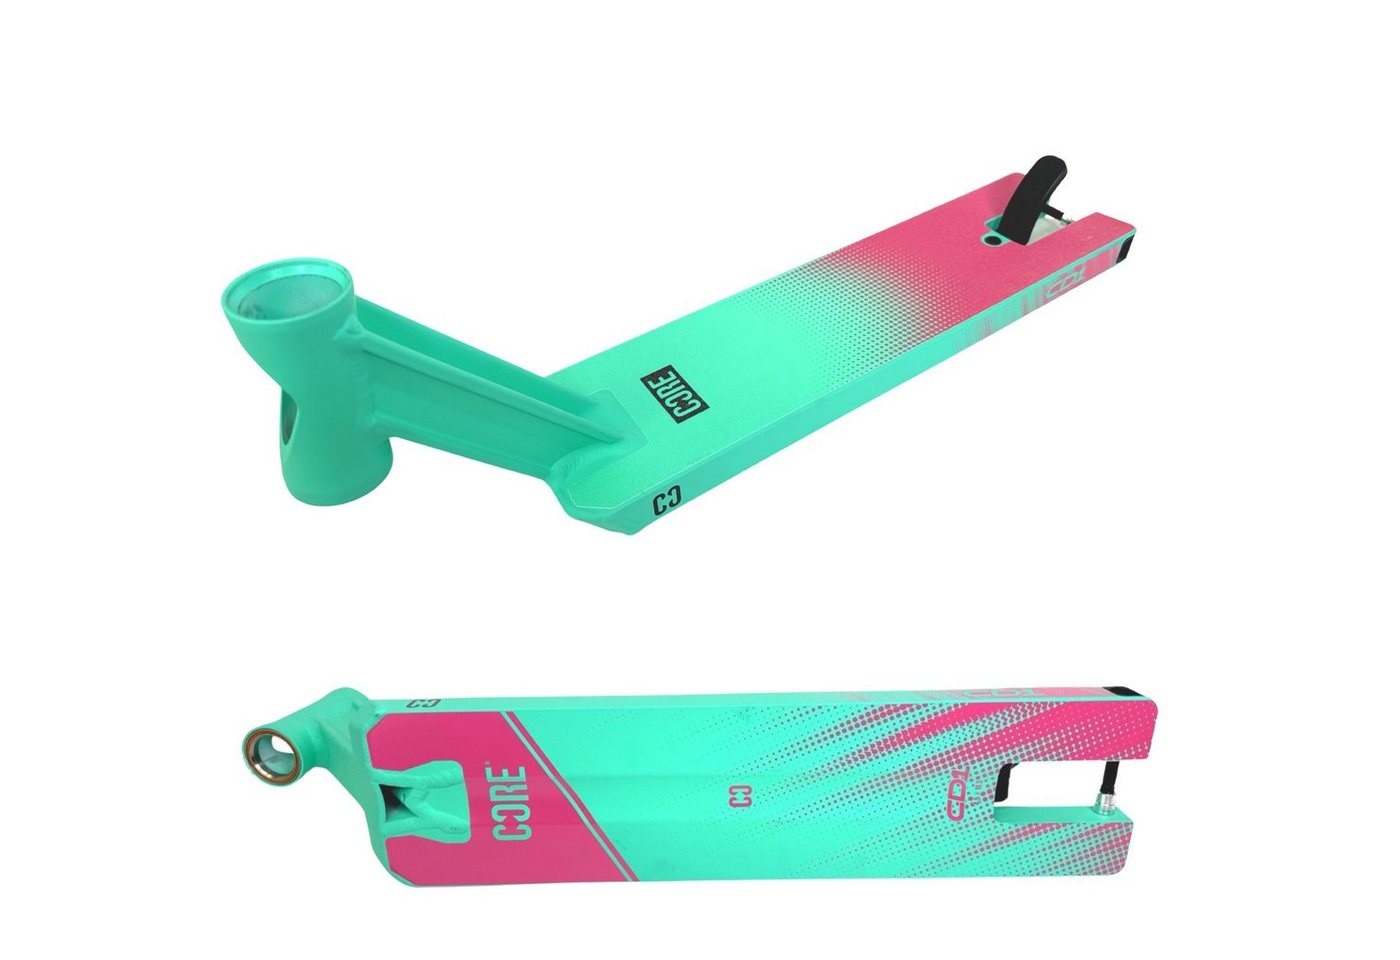 Core Action Sports Stuntscooter CORE CD1 Stunt-Scooter Park Deck 47cm 1160g Petrol/Pink von Core Action Sports